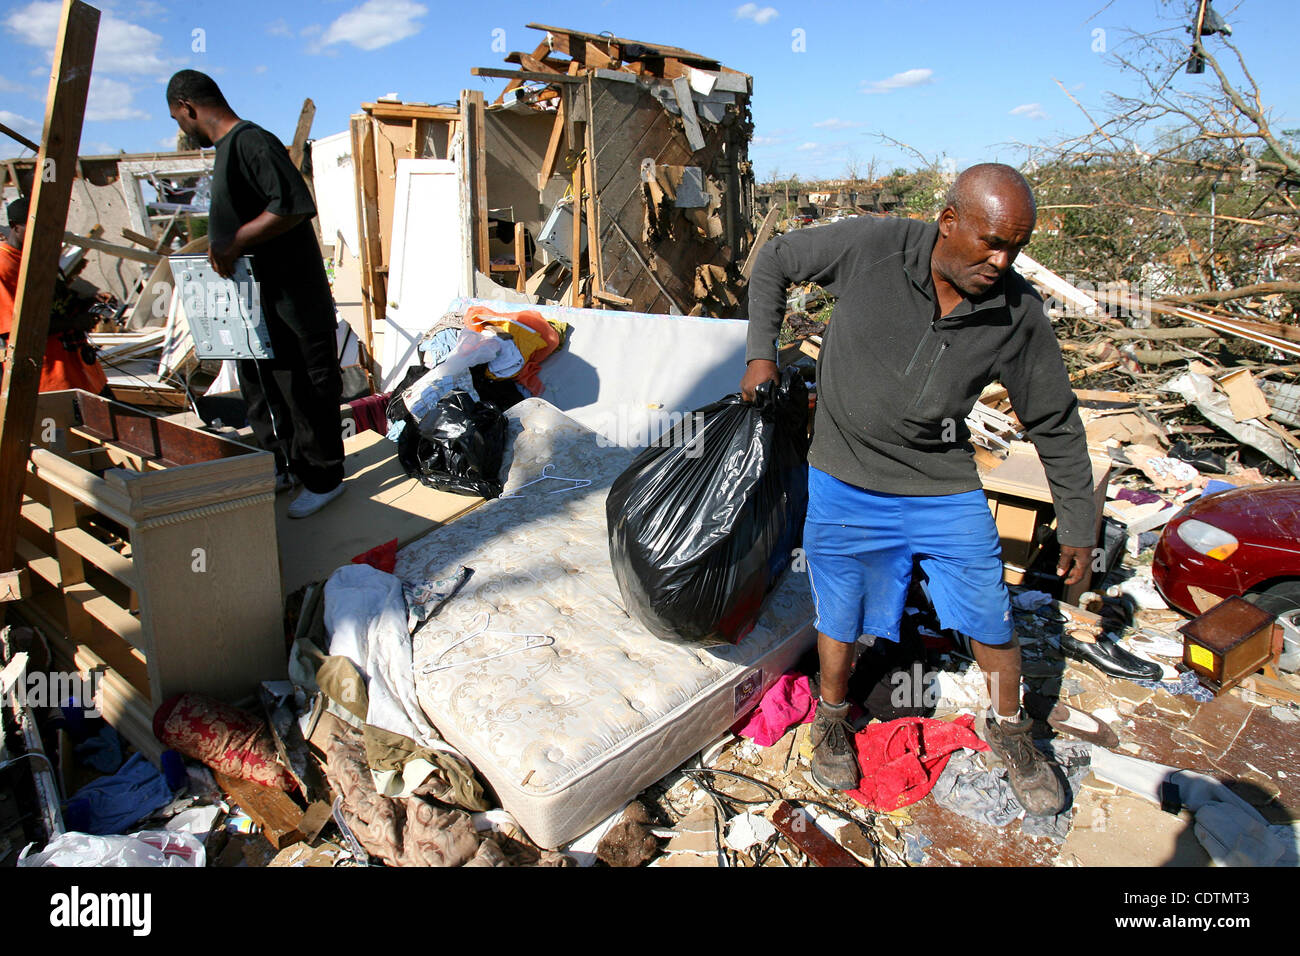 Apr 28, 2011 - Tuscaloosa, Alabama, U.S. - People pull items from their  tornado ravaged home in Tuscaloosa, Alabama. Over 100 have been confirmed dead in the state after deadly tornados destroyed homes and businesses yesterday. (Credit Image: &#169; Dan Anderson/ZUMAPRESS.com) Stock Photo